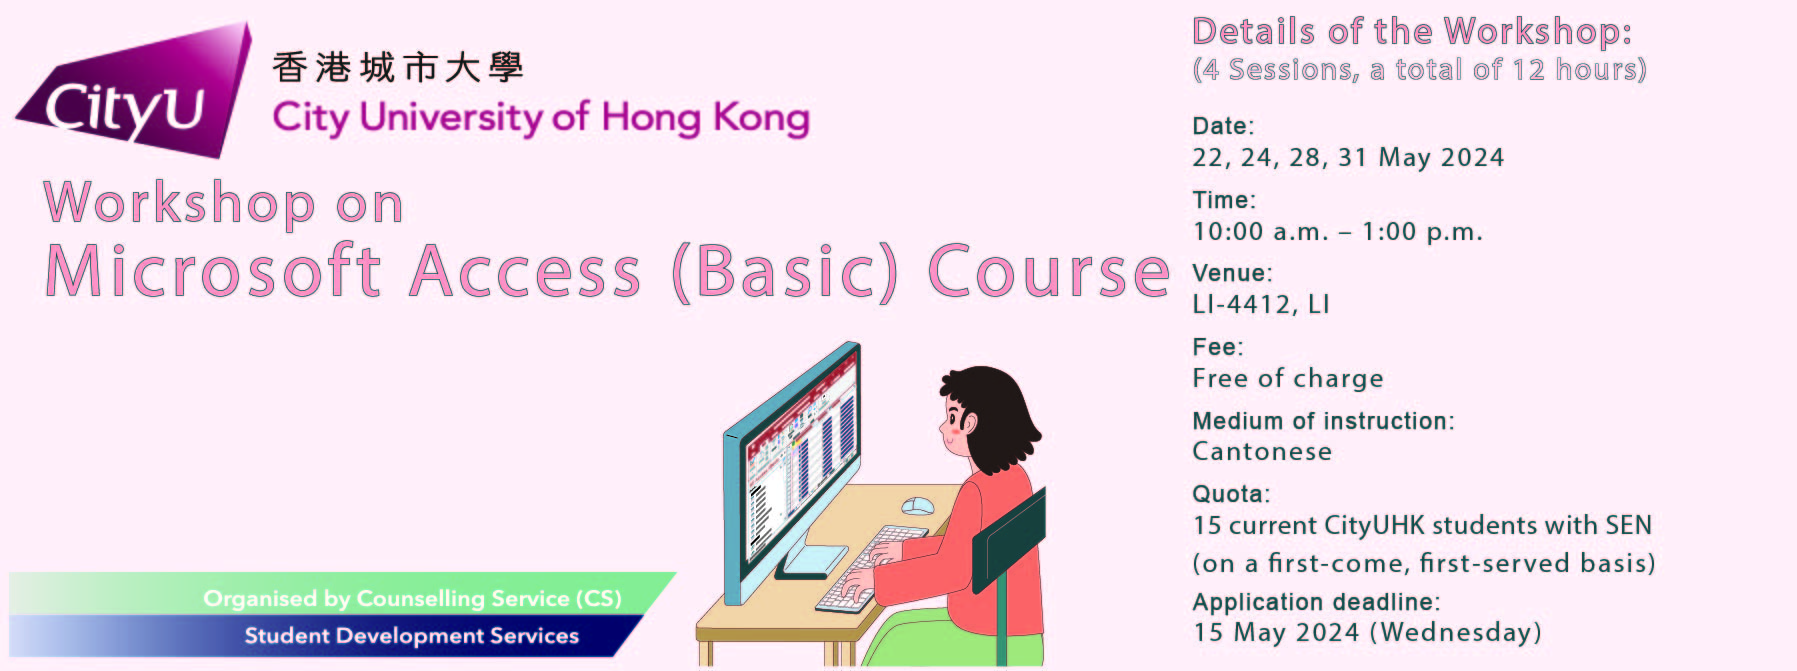 Workshop on Microsoft Access (Basic) Course